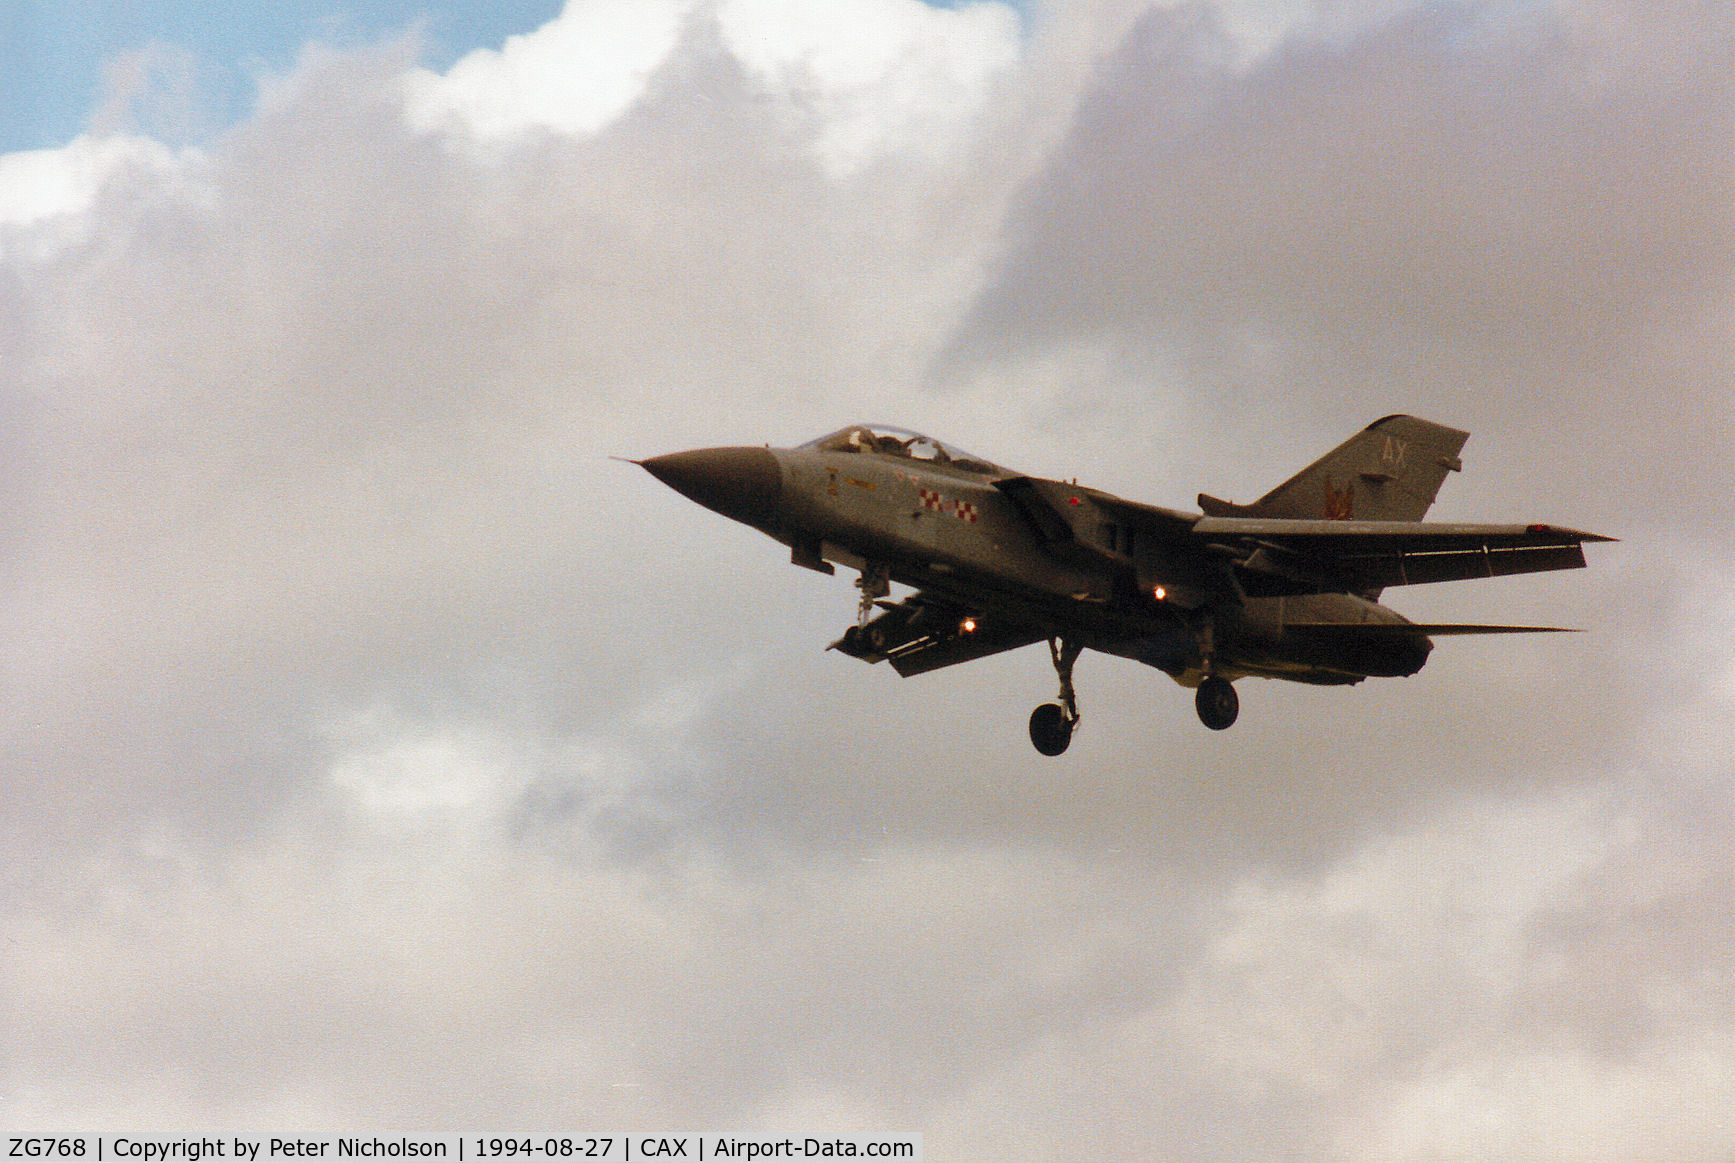 ZG768, Panavia Tornado F.3 C/N 886/AS135/3435, Another view of the 56[Reserve] Squadron Tornado F.3, callsign Phoenix 2, at the 1994 Carlisle Airshow.